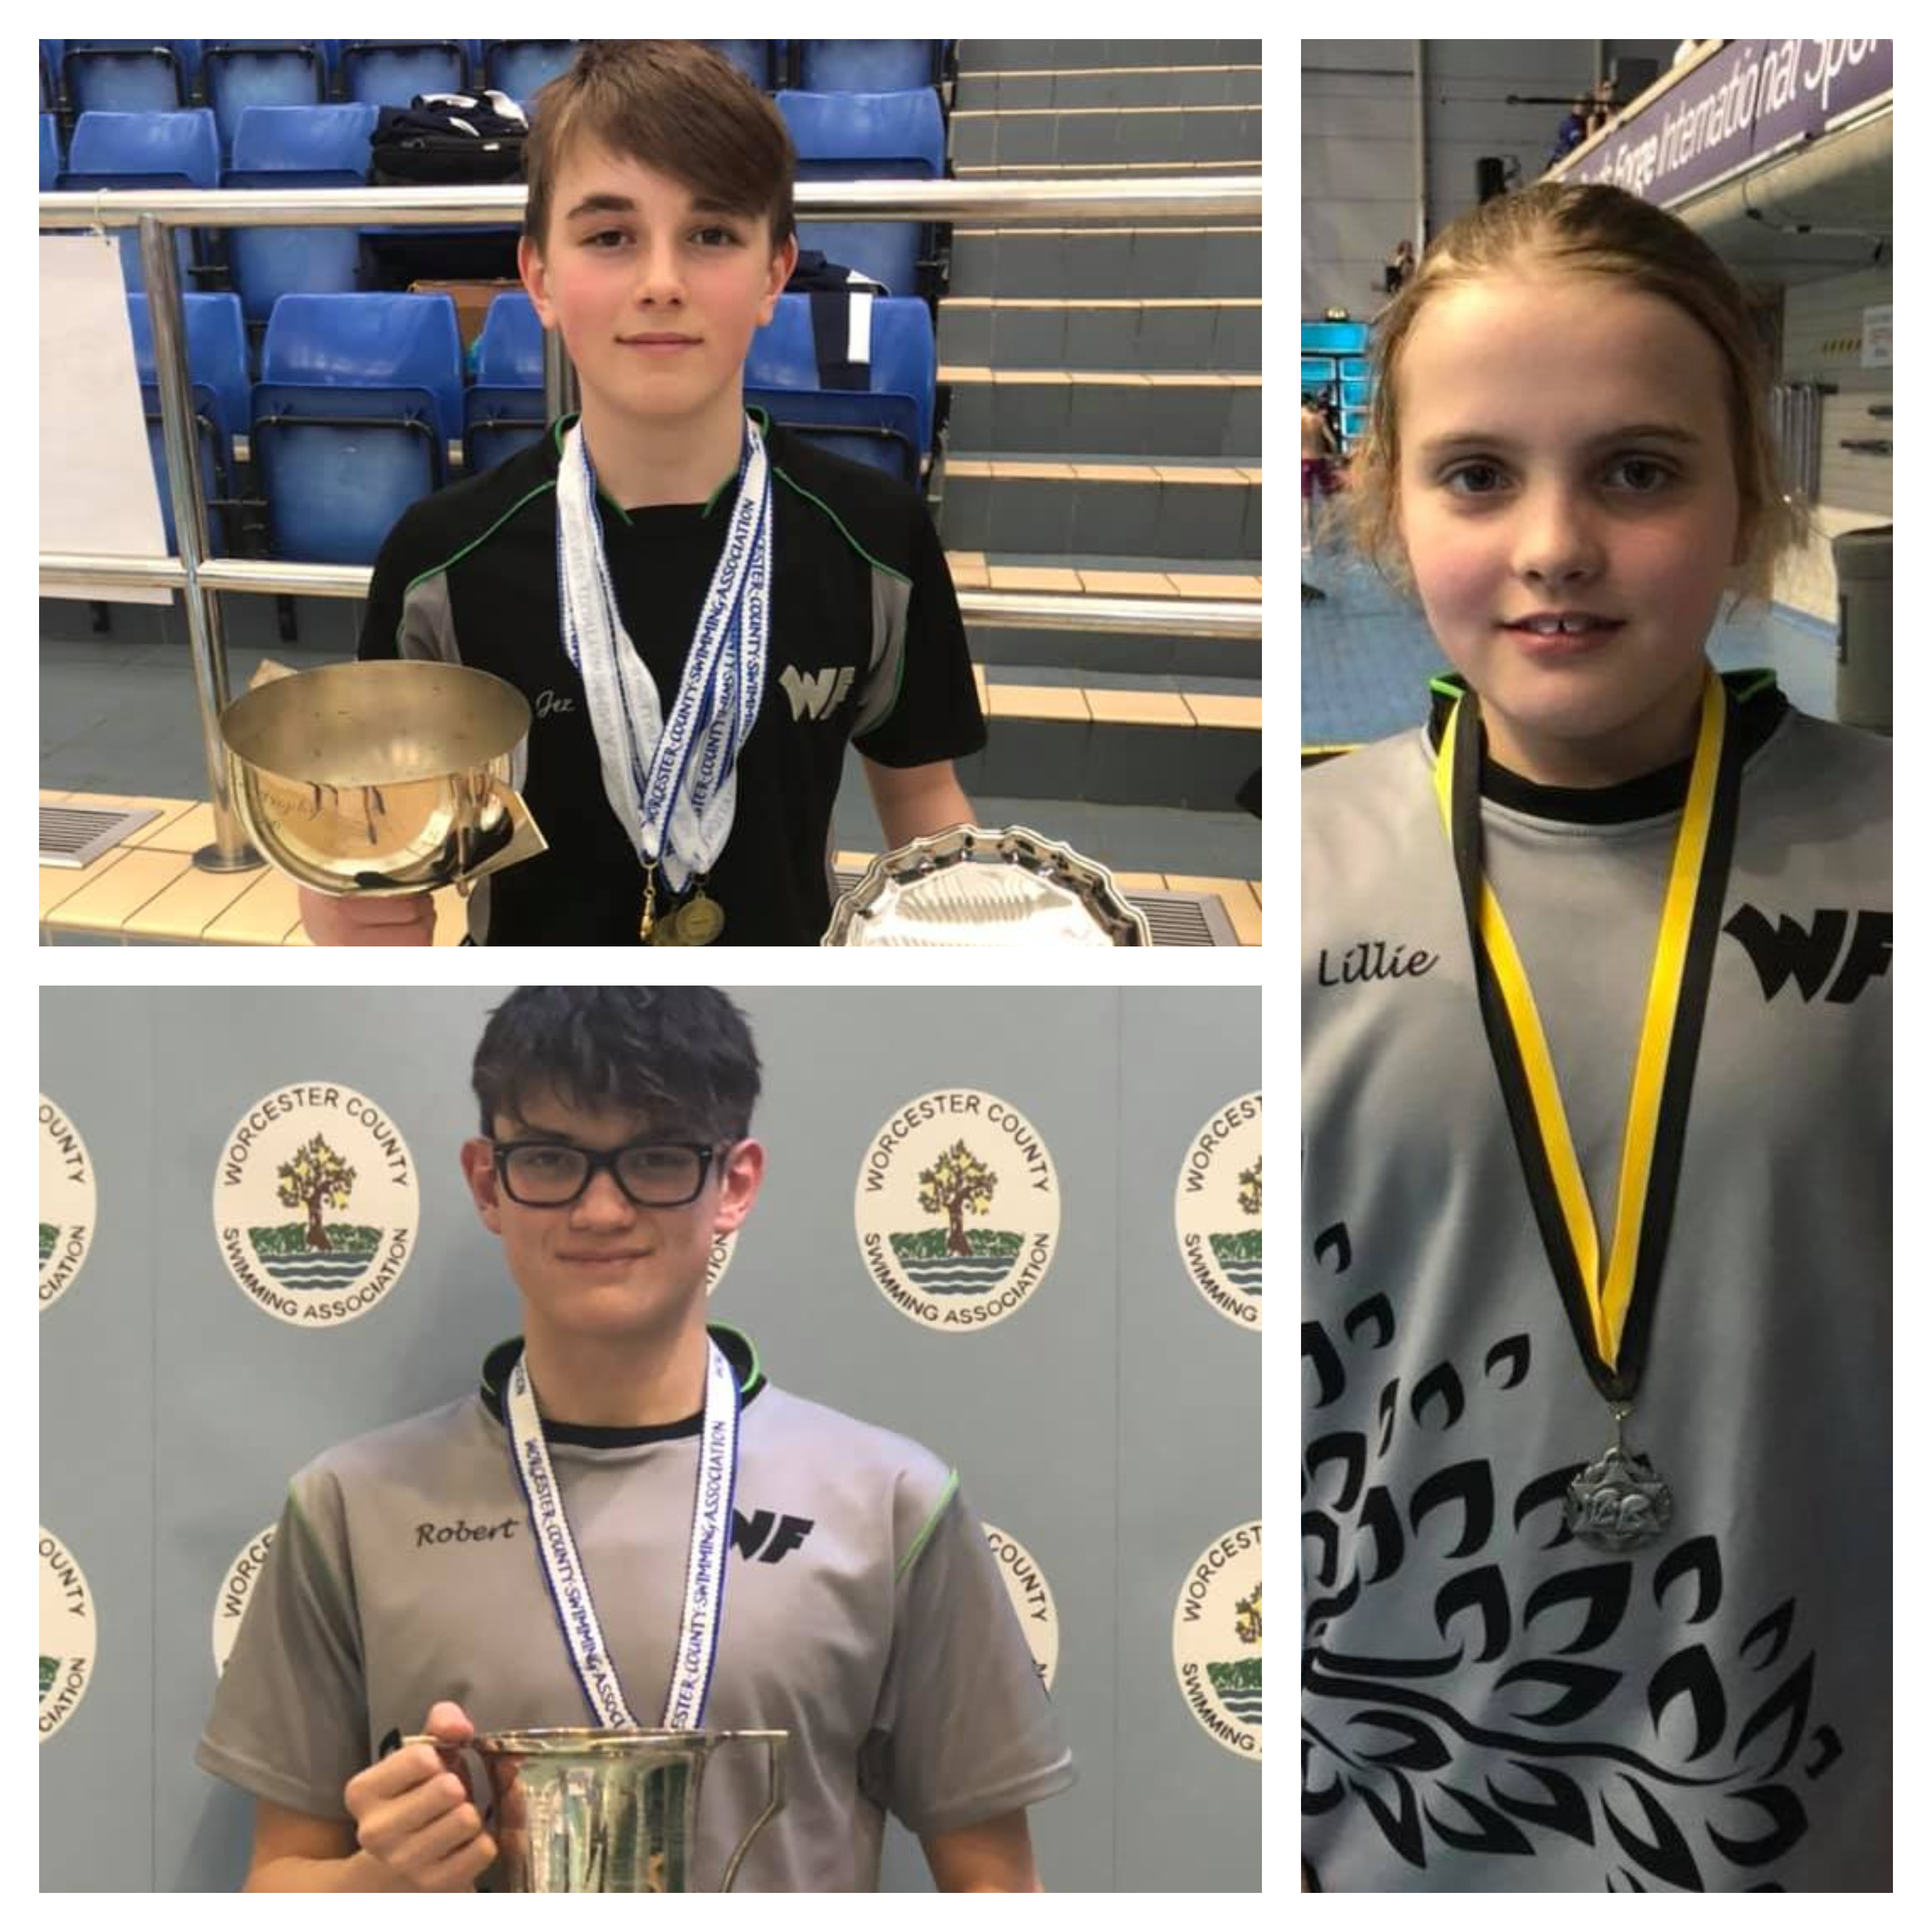 MEDALS AND COUNTY CHAMPION TITLES WON AT WORCESTERSHIRE COUNTY CHAMPIONSHIPS 2019